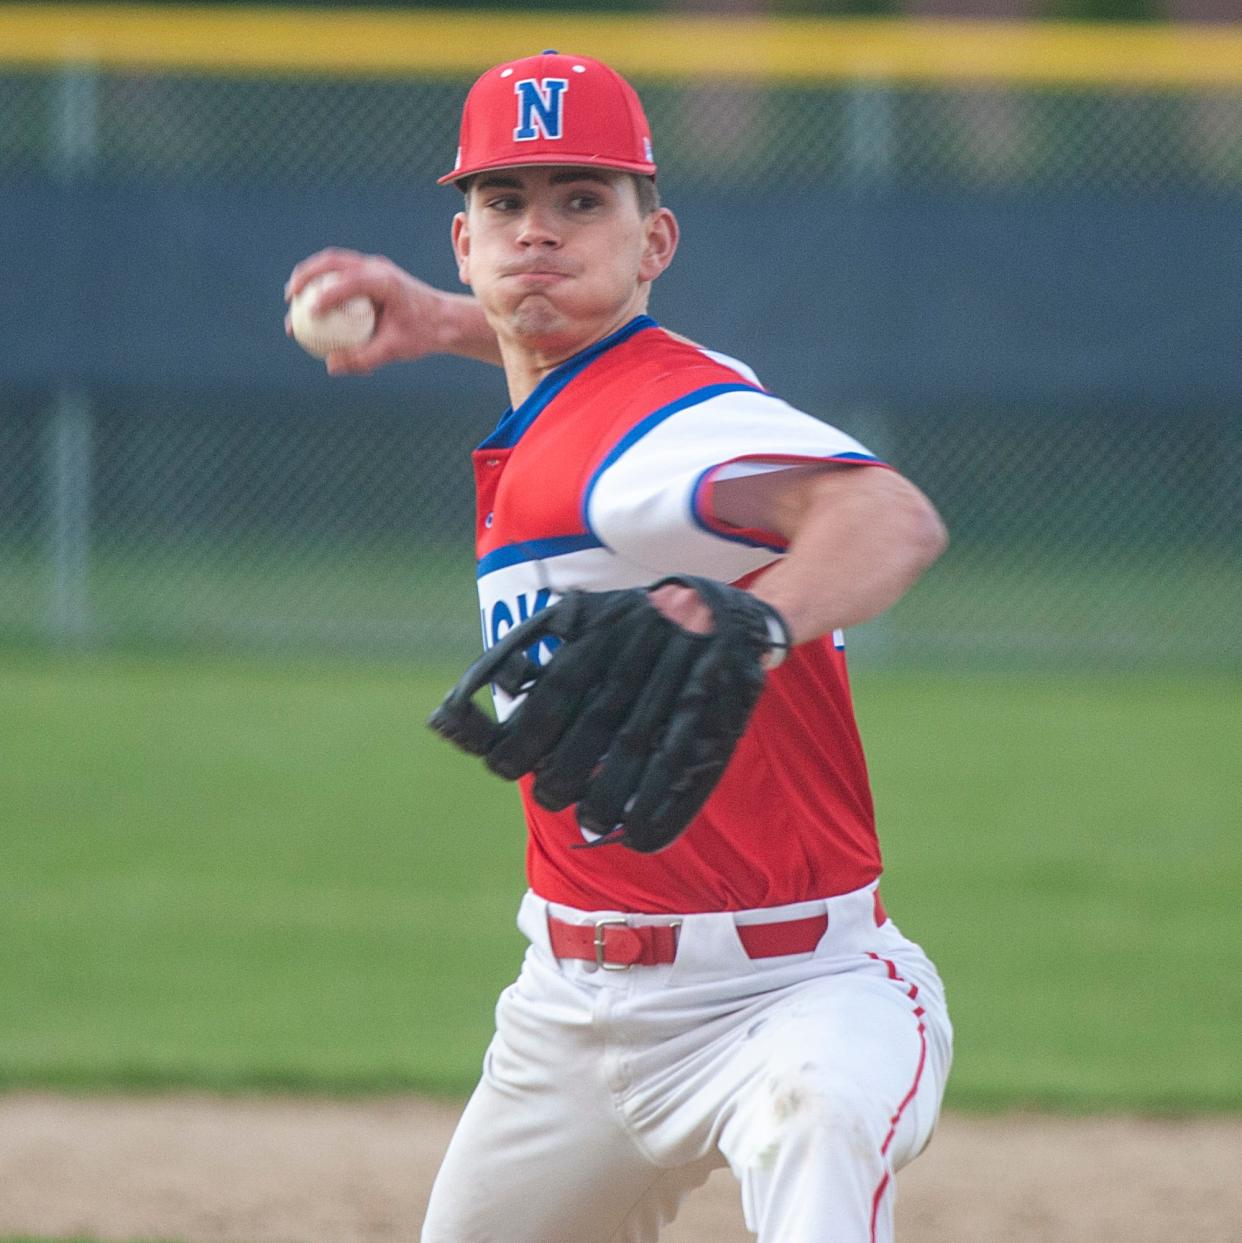 Natick High School pitcher Teddy Ferrucci in the first Paul "Bunkie" Smith Memorial game between Framingham High School and Natick High School, May 13, 2024. Smith, a former coach and player, died Sept. 24, 2023.